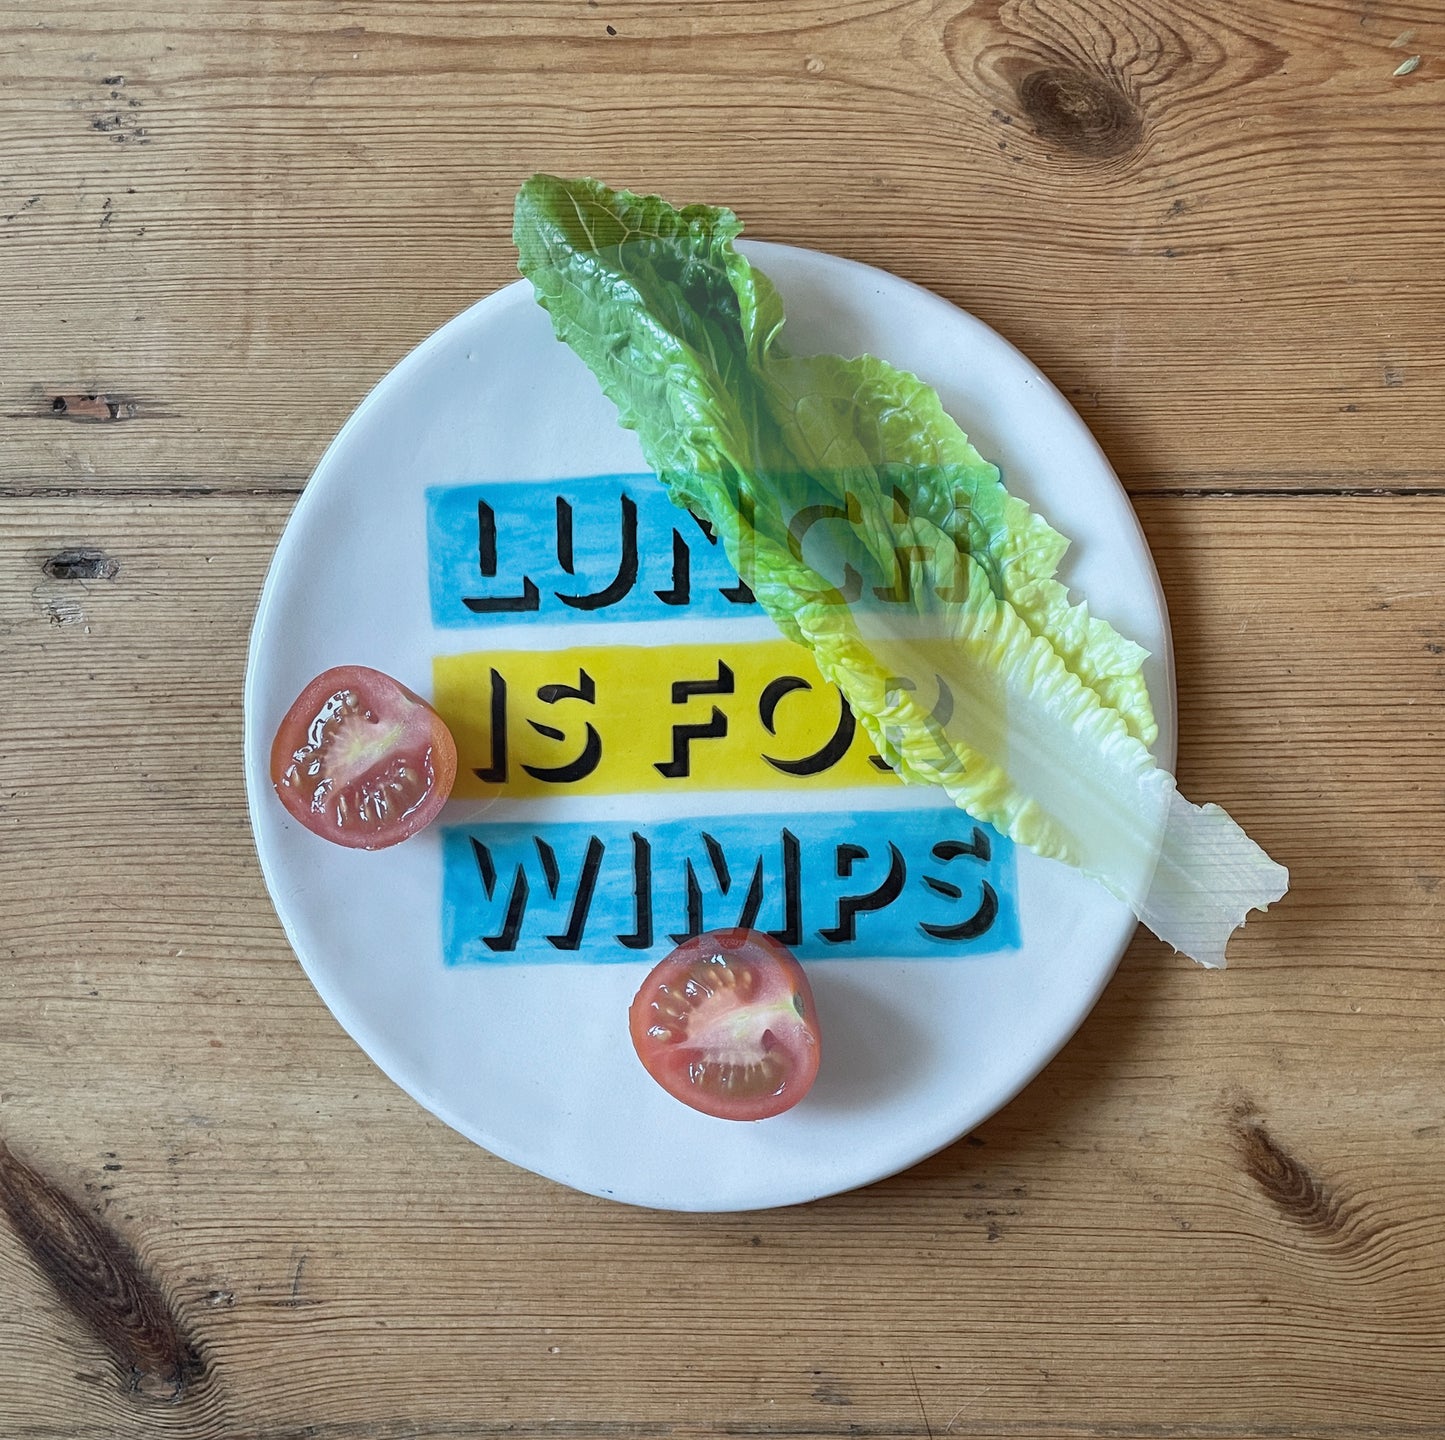 Wall Street – 'Lunch Is For Wimps' Plate